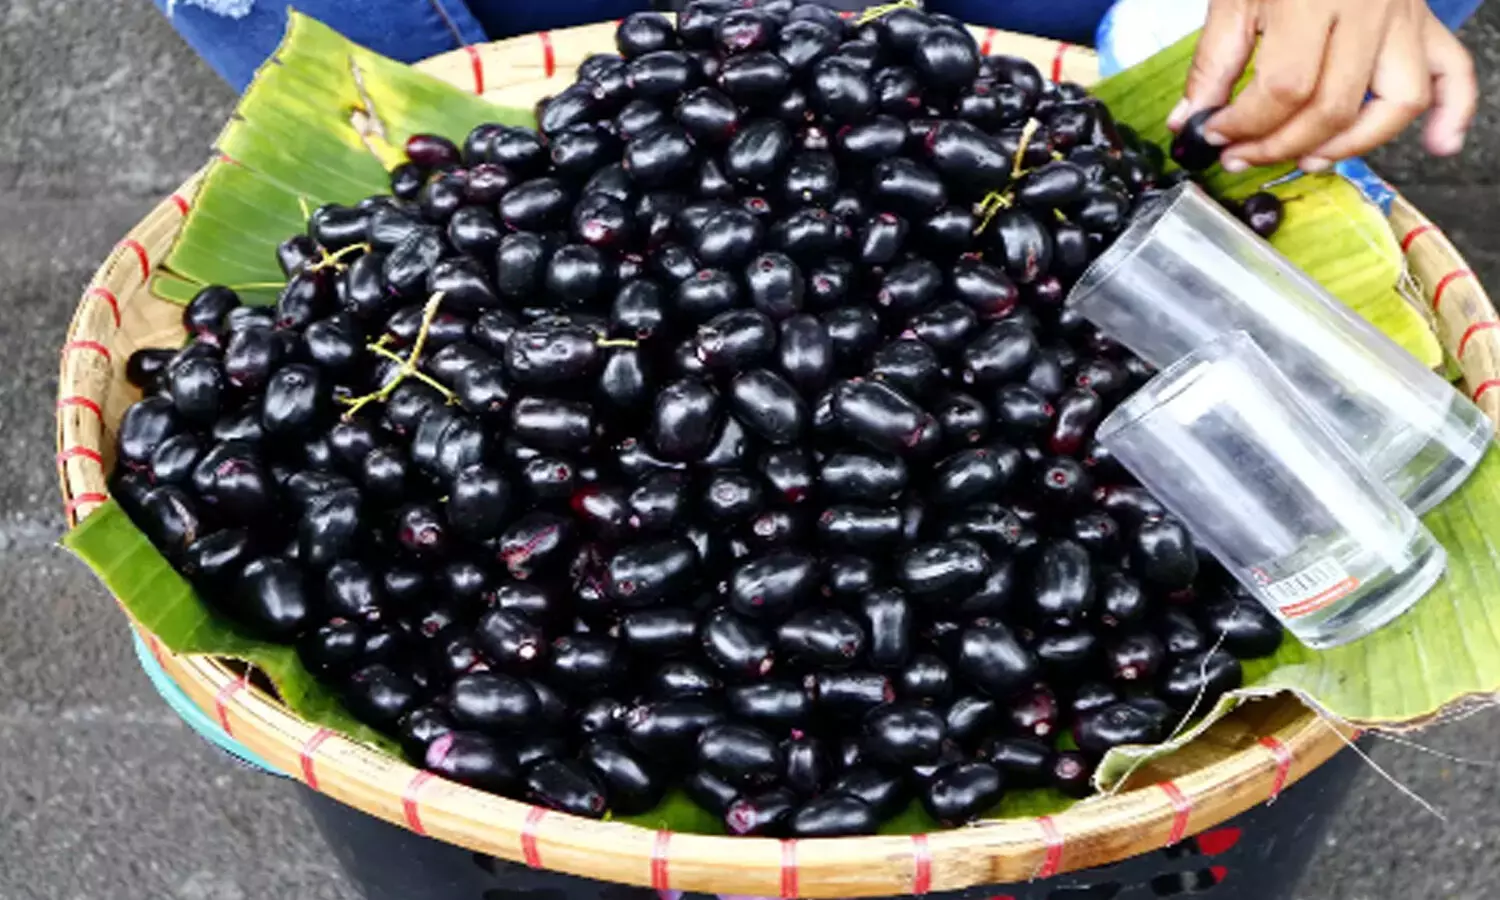 Jamun is becoming increasingly popular in the fruit markets